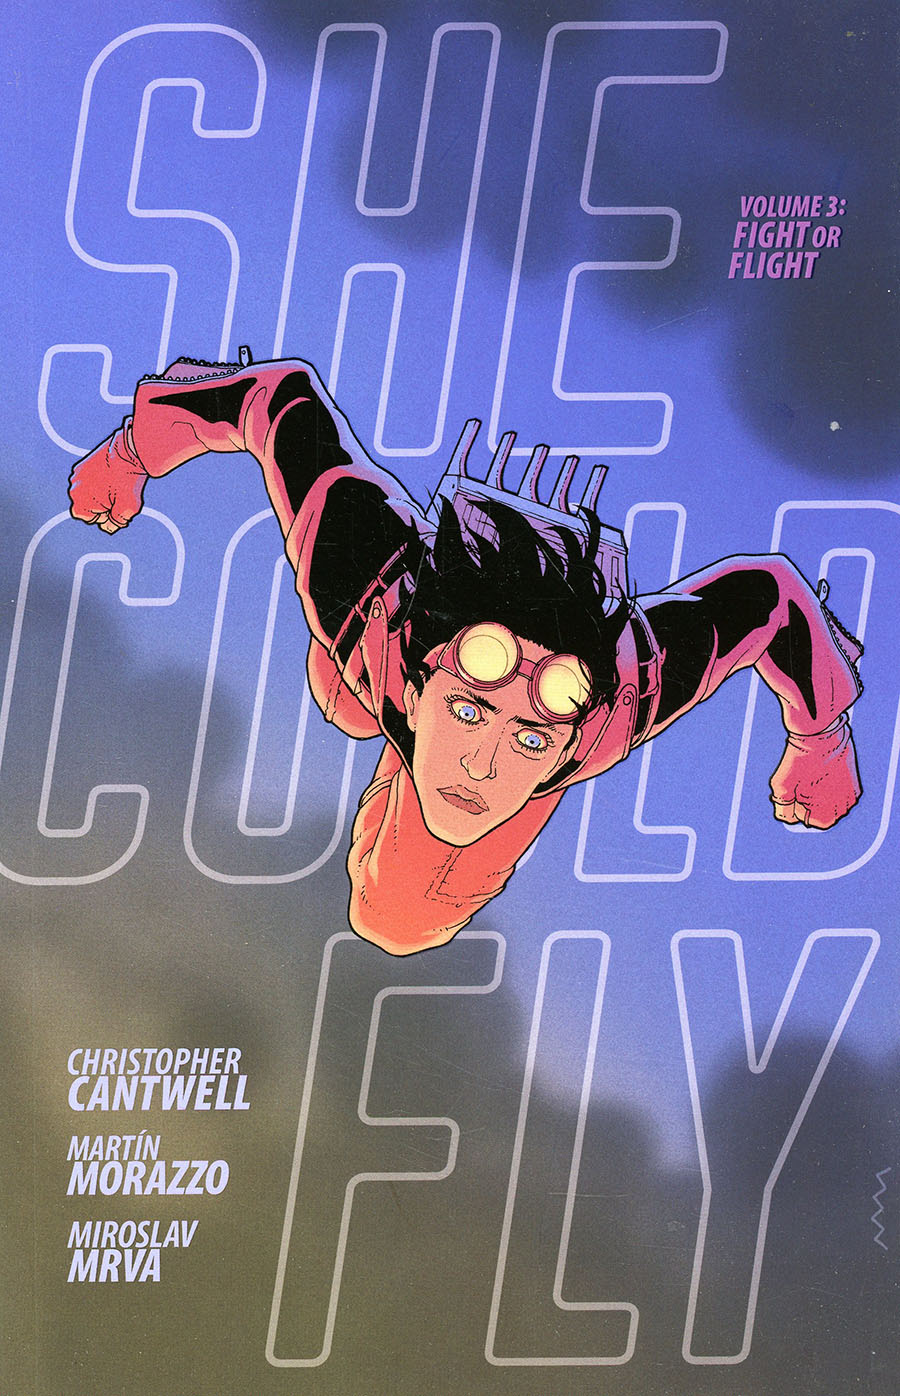 She Could Fly Vol 3 Fight Or Flight TP